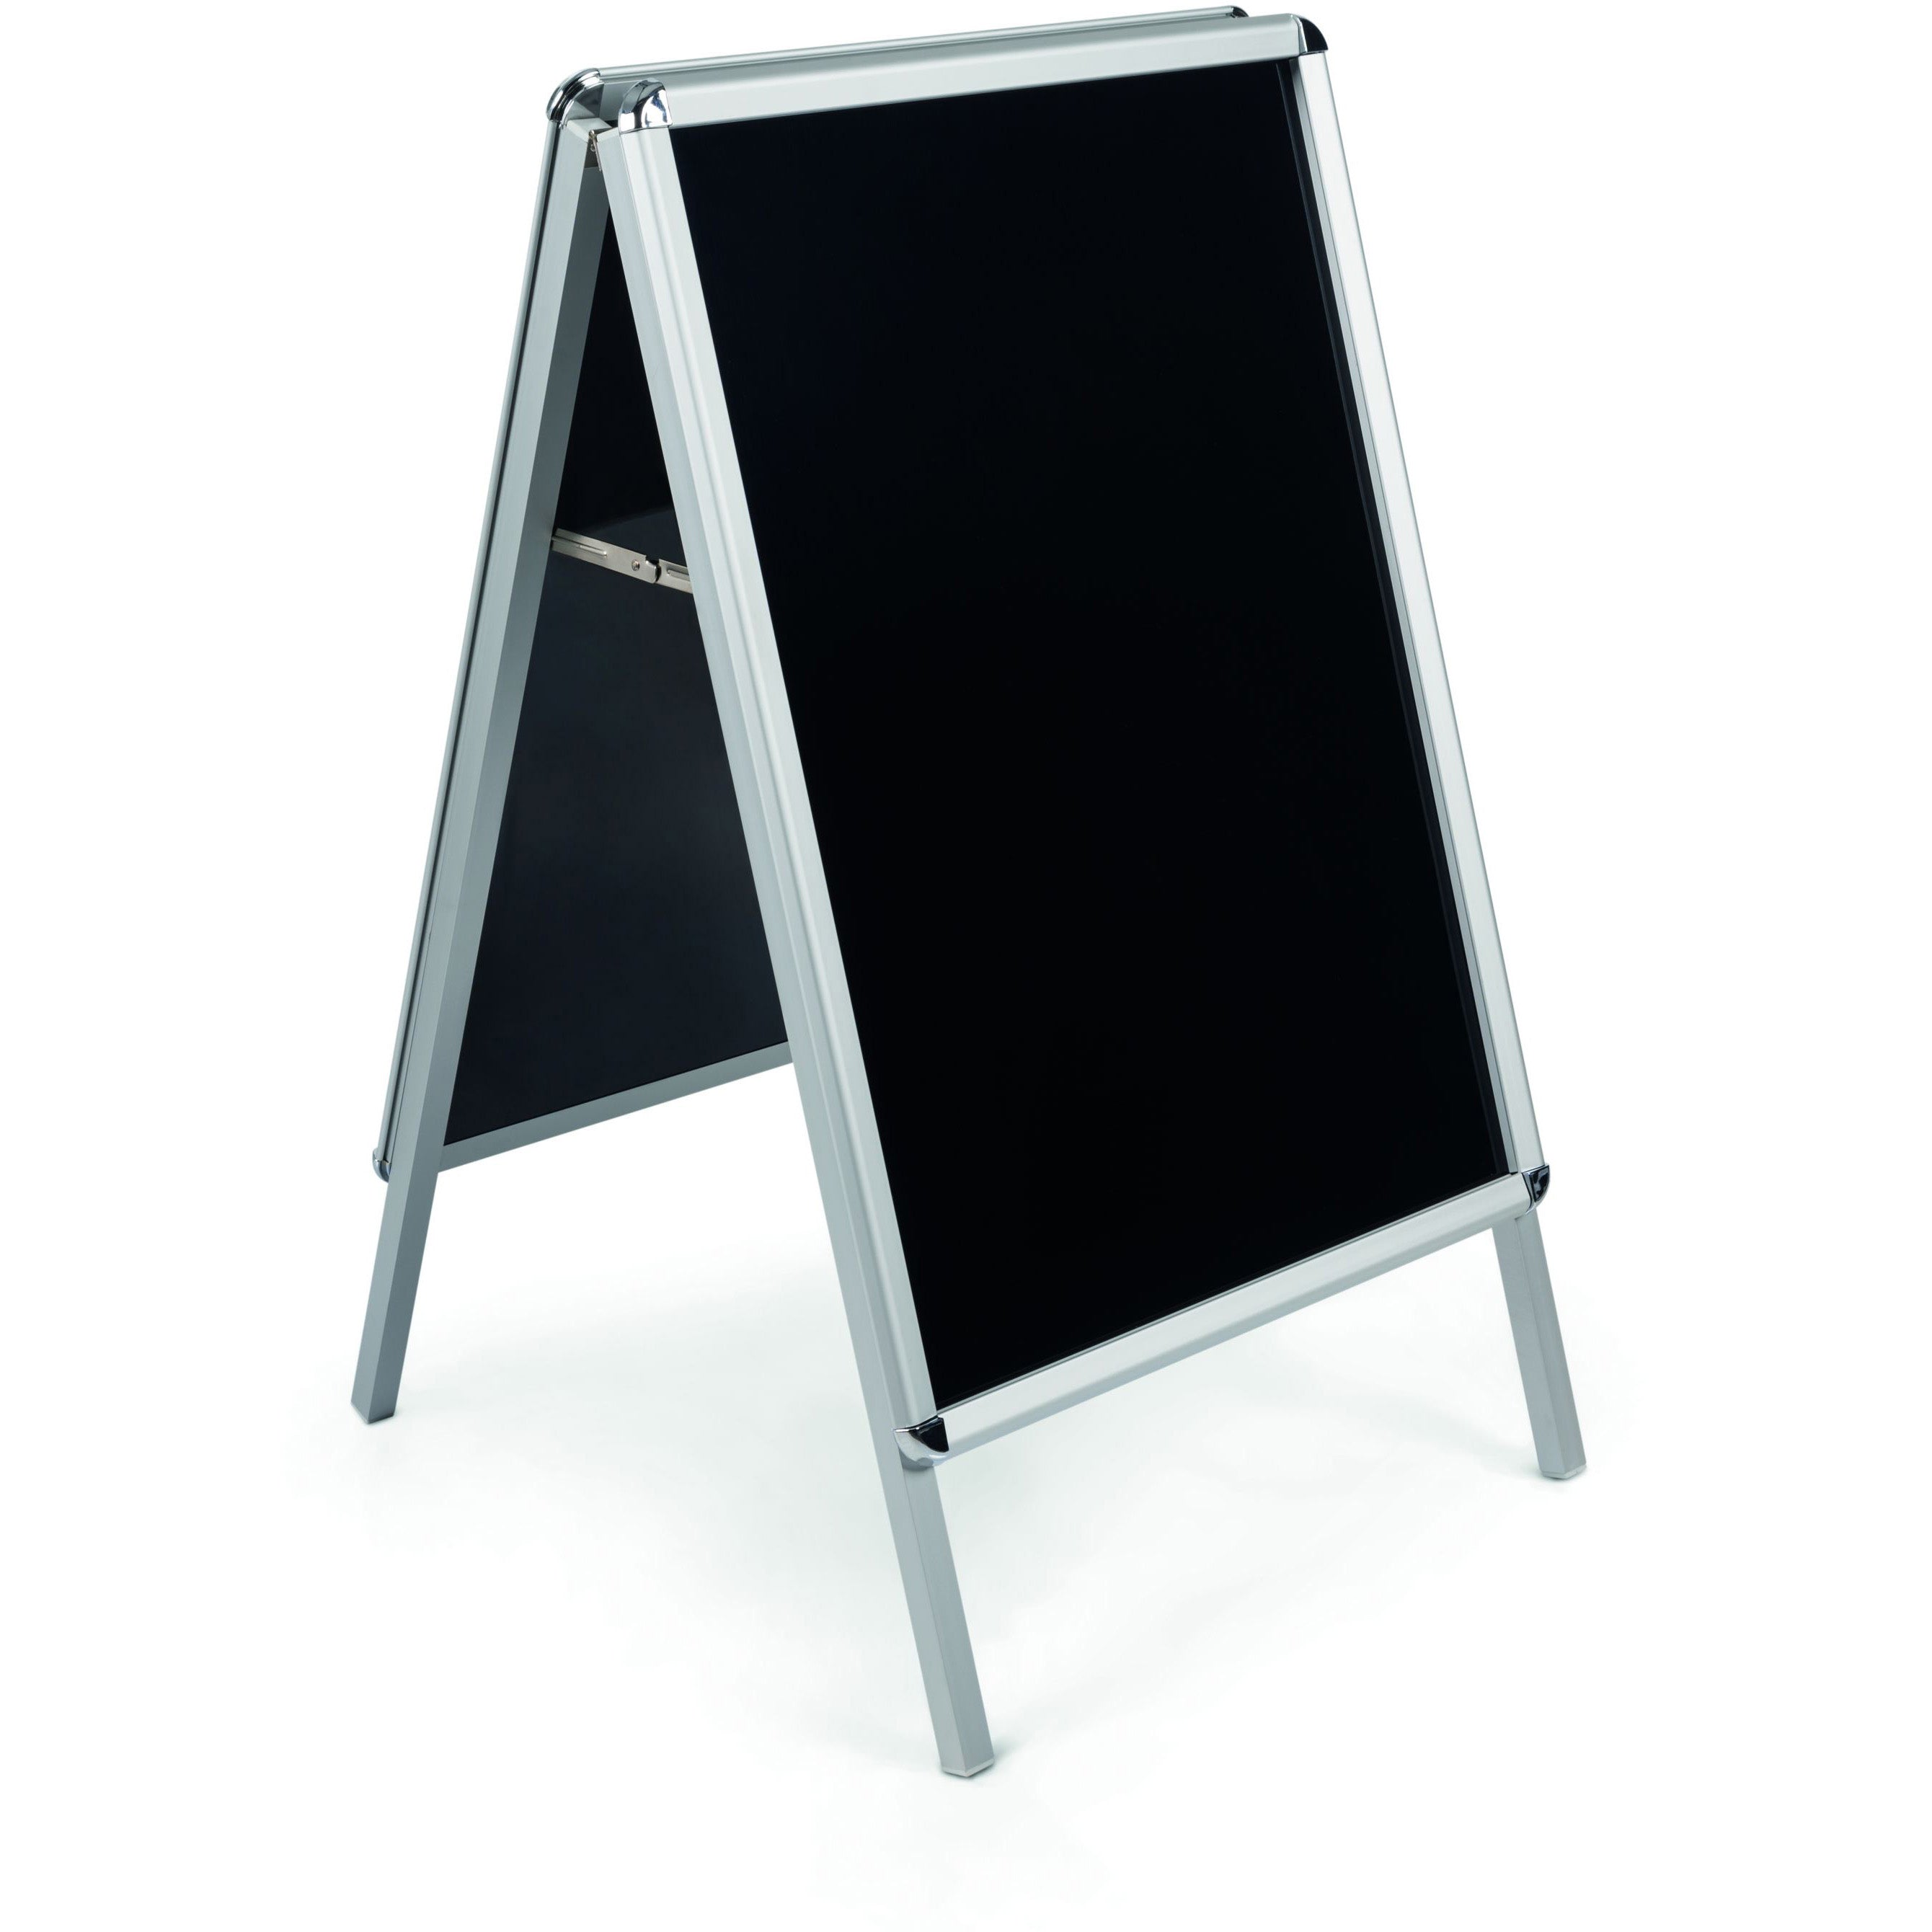 DKT30505072 Freestanding Magnetic Wet Erase Sidewalk Sign Board, Double Sided A-Frame Sandwich Board, 35" x 25", Aluminum Frame by MasterVision